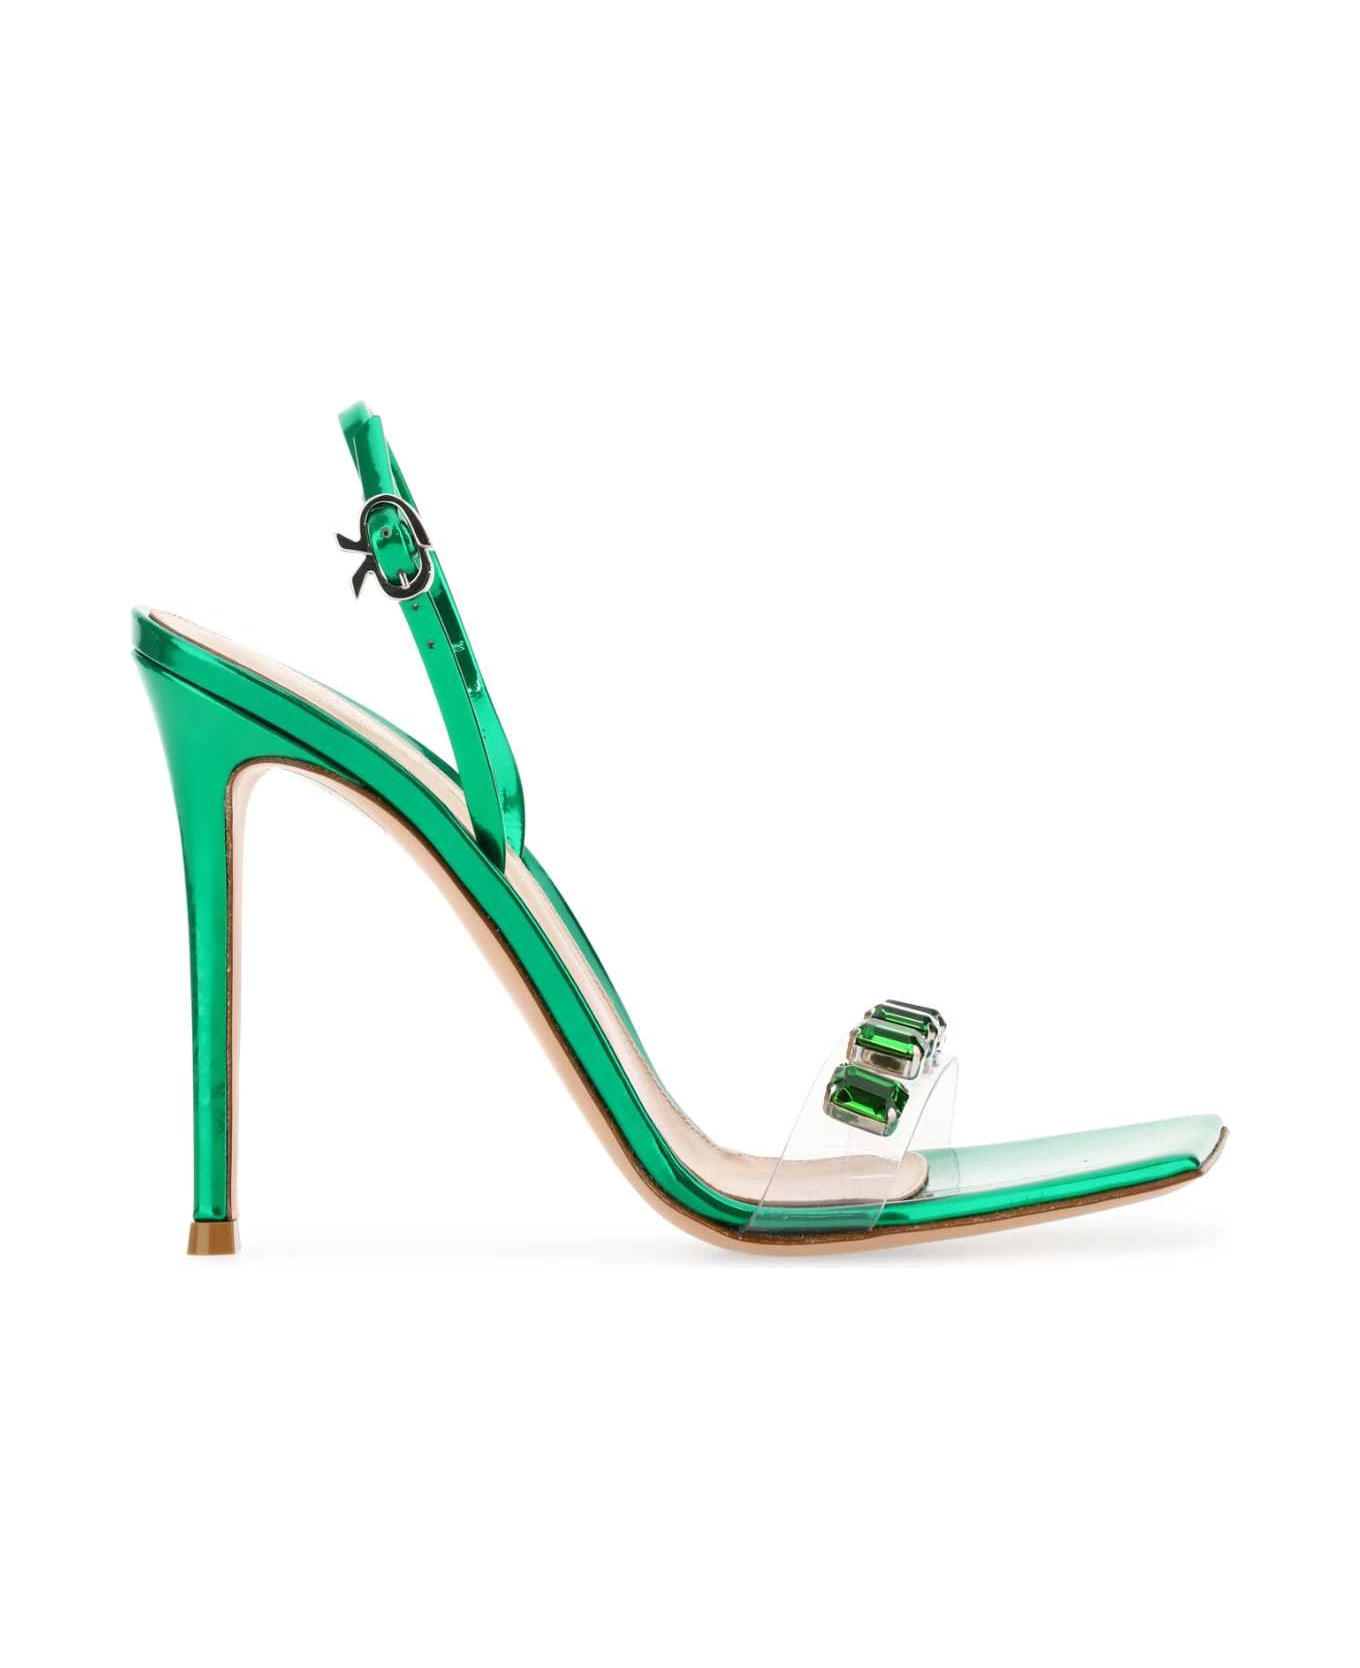 Gianvito Rossi Green Leather â and Pvc Ribbon Candy Sandals - TRGR サンダル